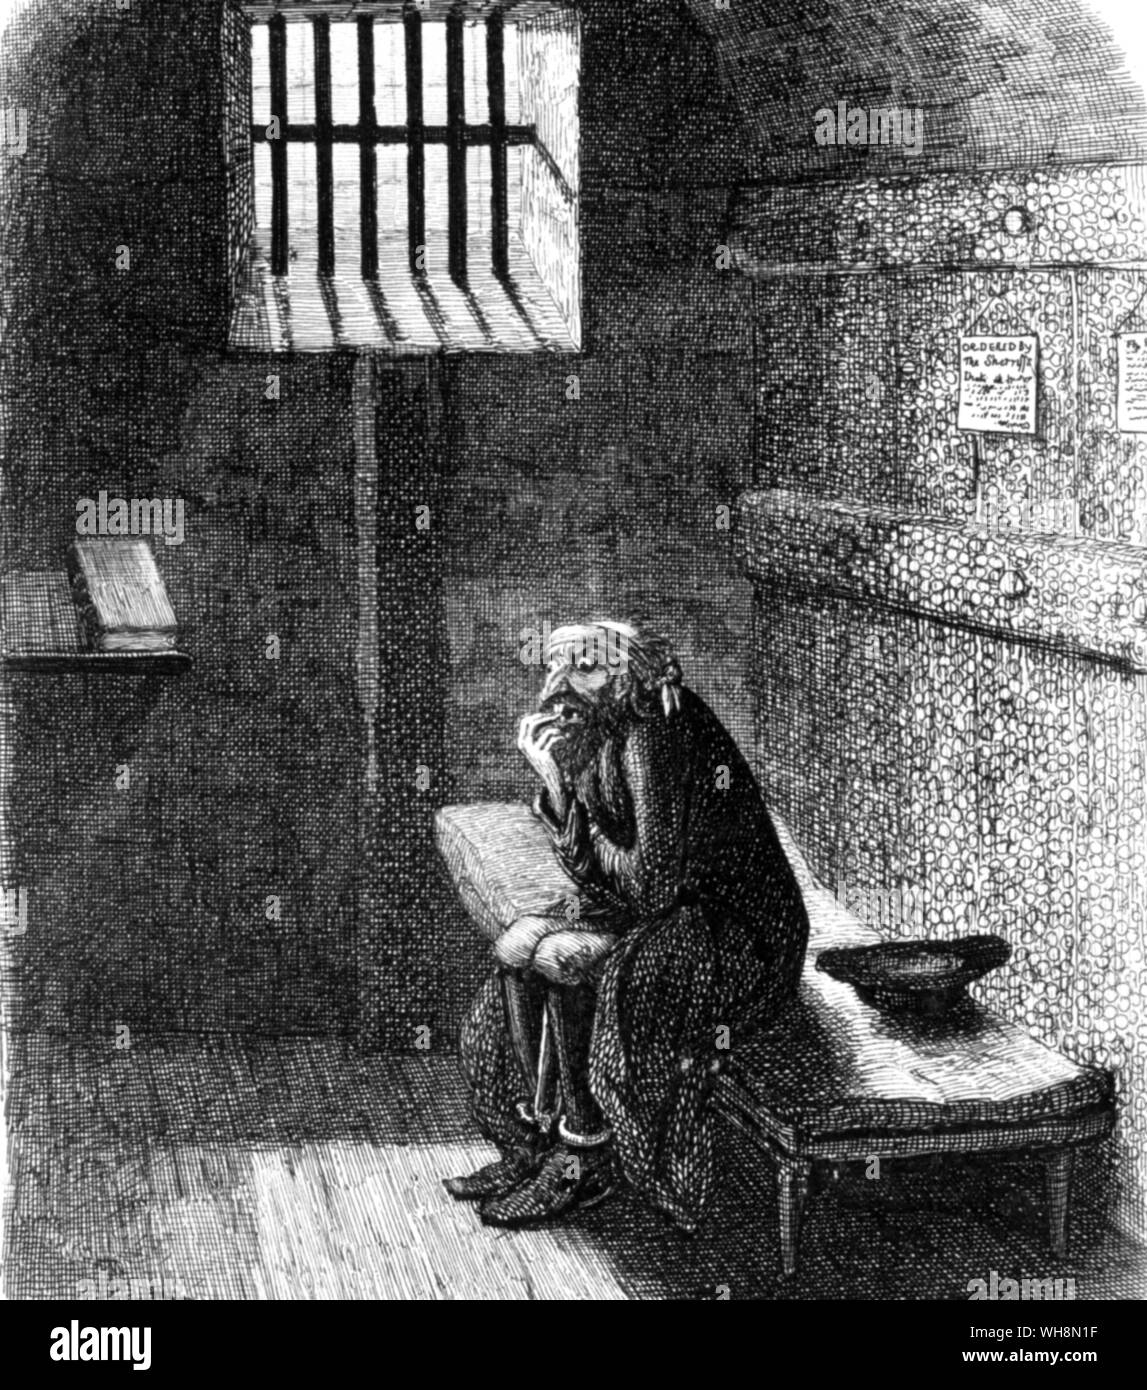 Crime in Literature Fagin in the condemned cell: George Cruickshank's illustration in Dicken's Oliver Twist . Fagin in the condemned cell from Charles Dickens' Oliver Twist Stock Photo